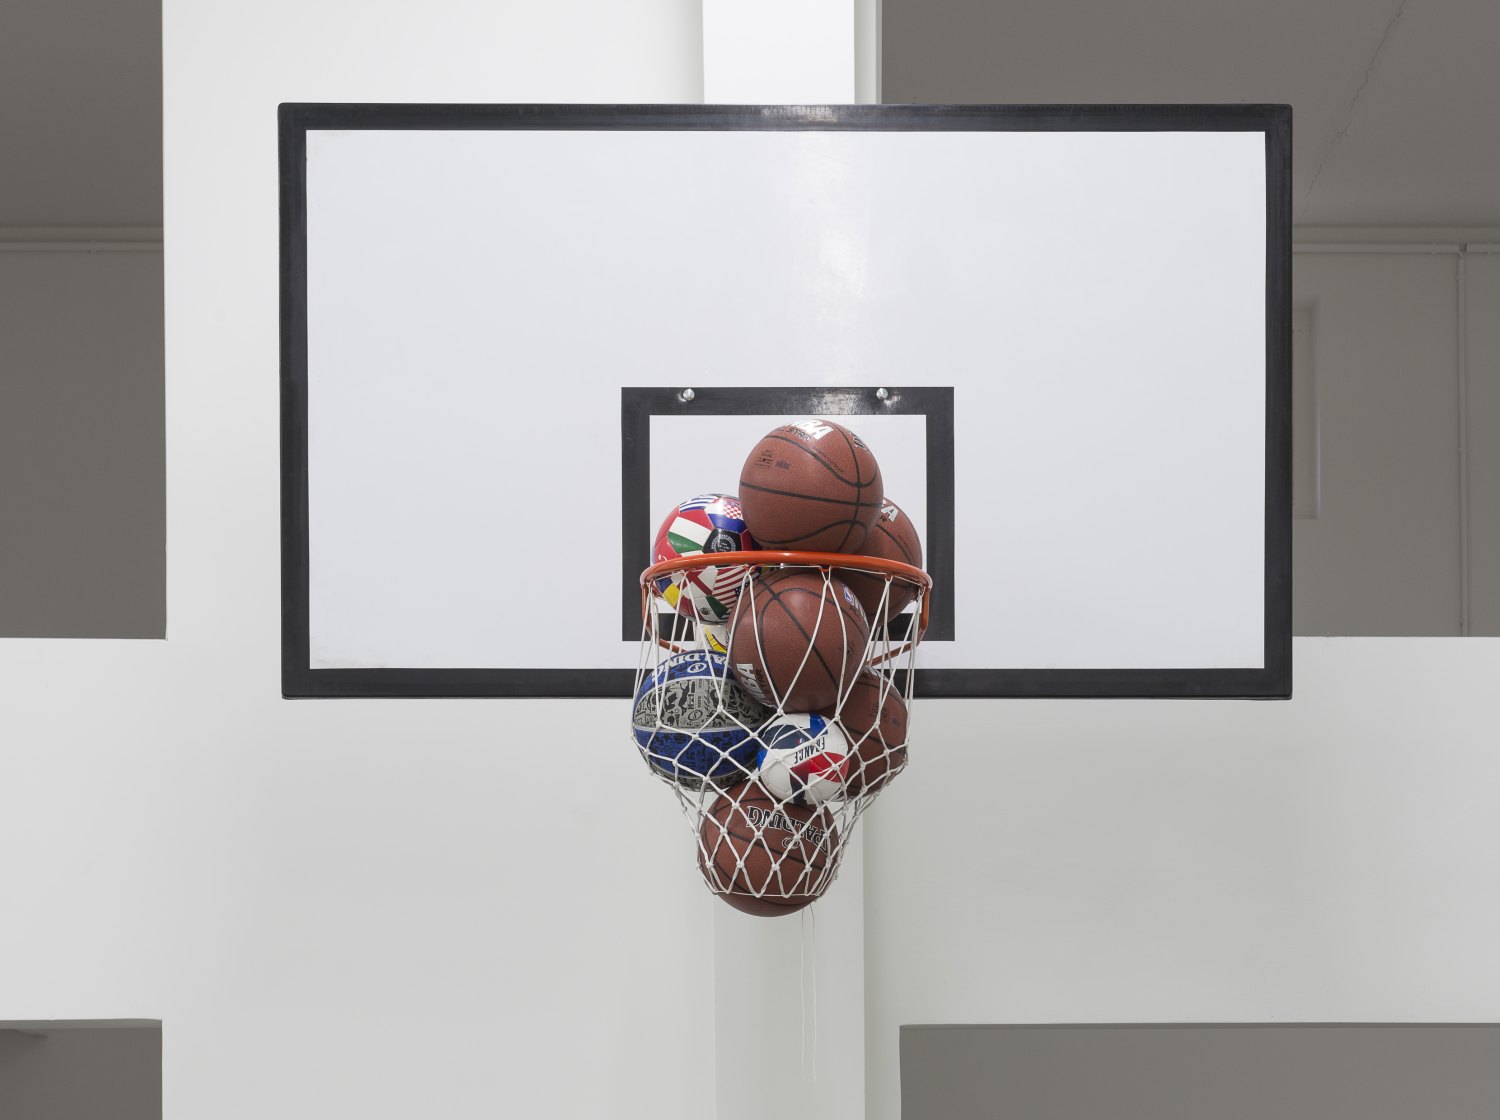 Claire Fontaine Caught, 2016 Basketball backboard, support, basketball hoop, net and various balls, 140 x 180 x 110 cm   